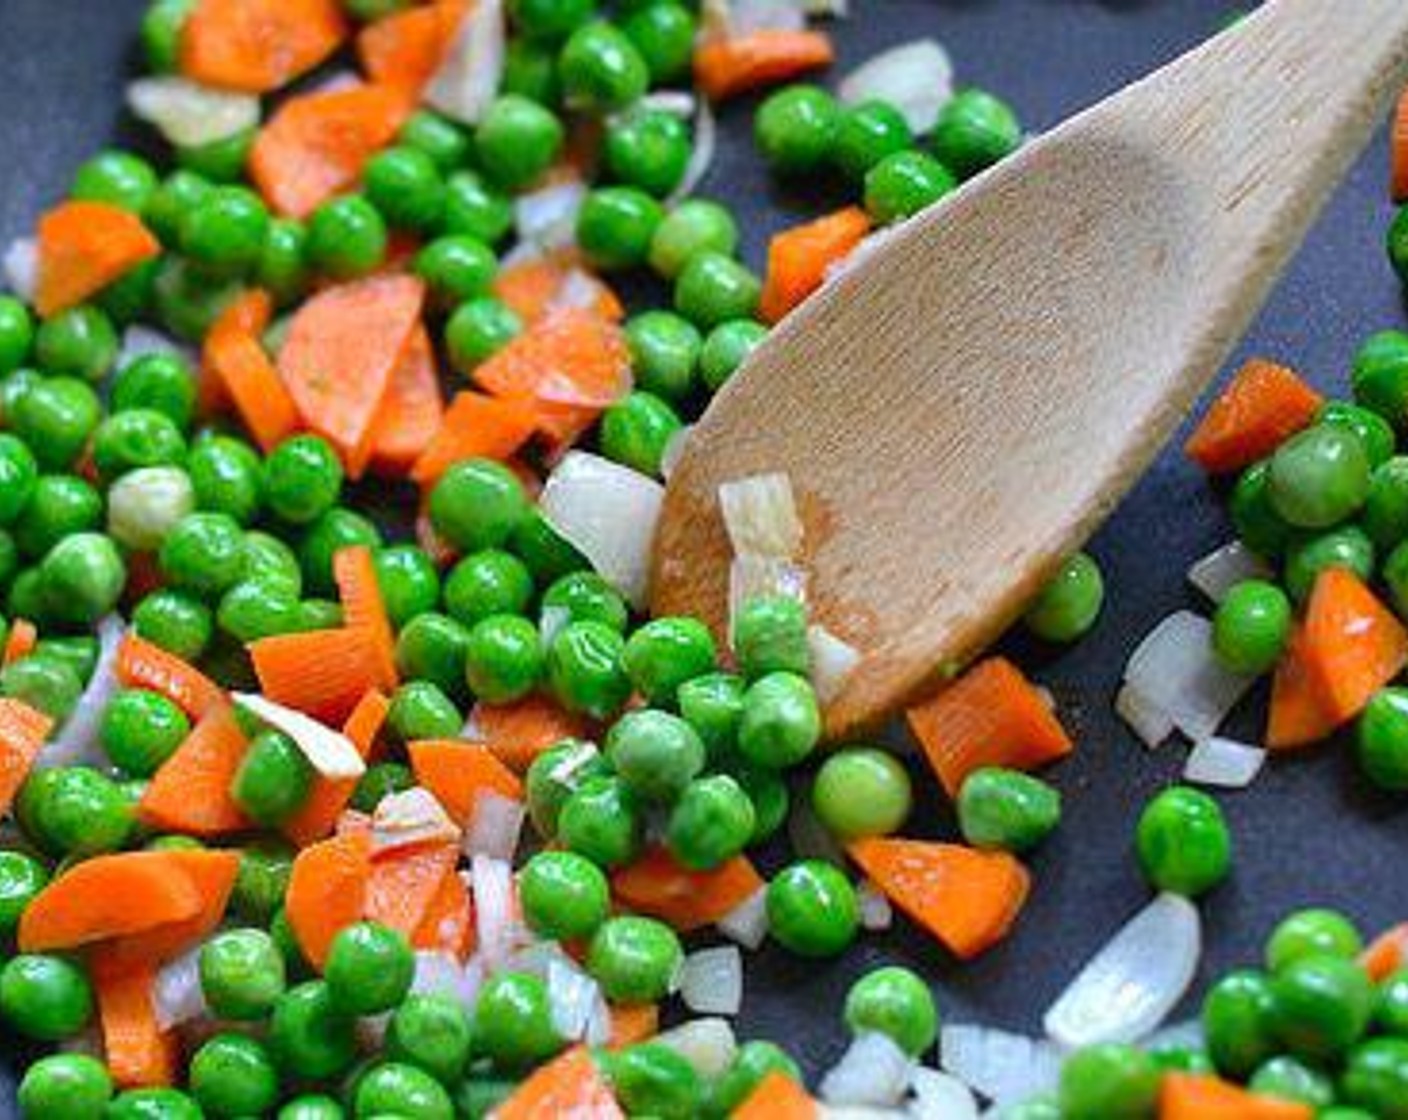 step 1 Saute Onion (1) in Sesame Oil (1 Tbsp) in a pan or wok on medium high heat until translucent, then add Garlic (3 cloves) and saute for ten seconds and add Frozen Peas and Carrots (2 cups). Stir fry until vegetables start getting tender.